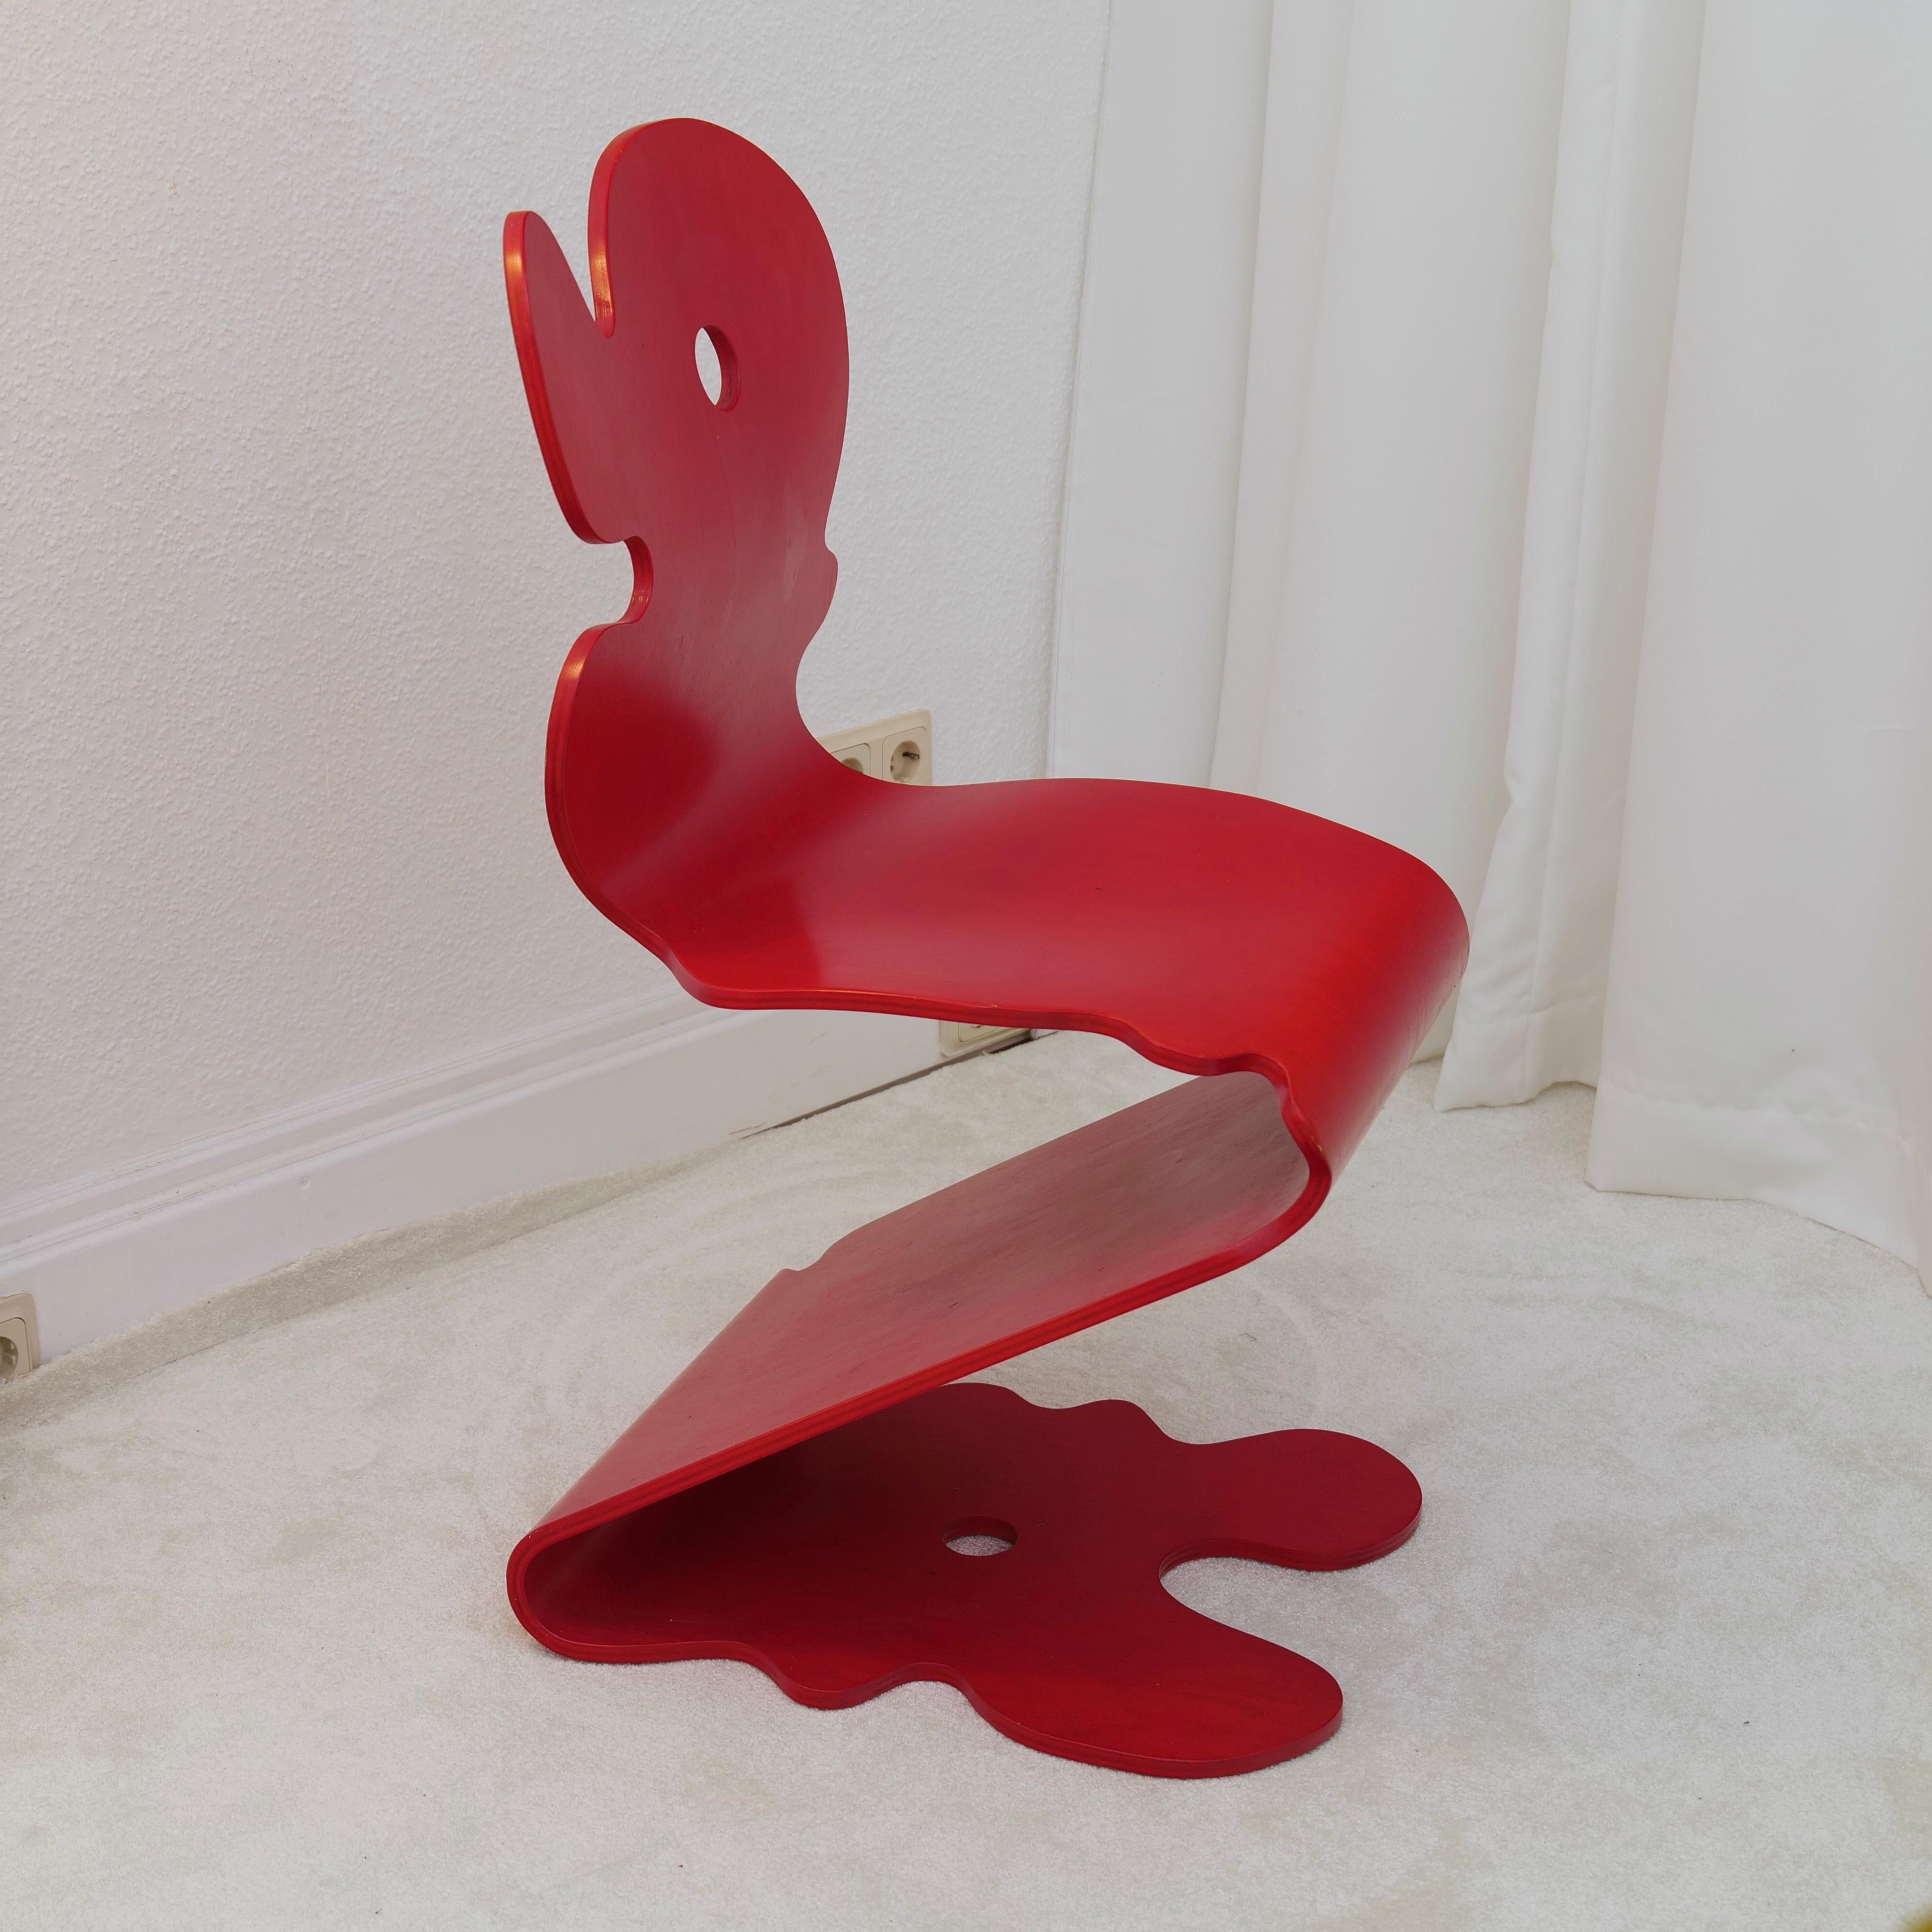 rare red 5020 Pantonic Chair in very good condition with slight signs of use

bright red colour - perfect collectors piece and stackable with other chairs.